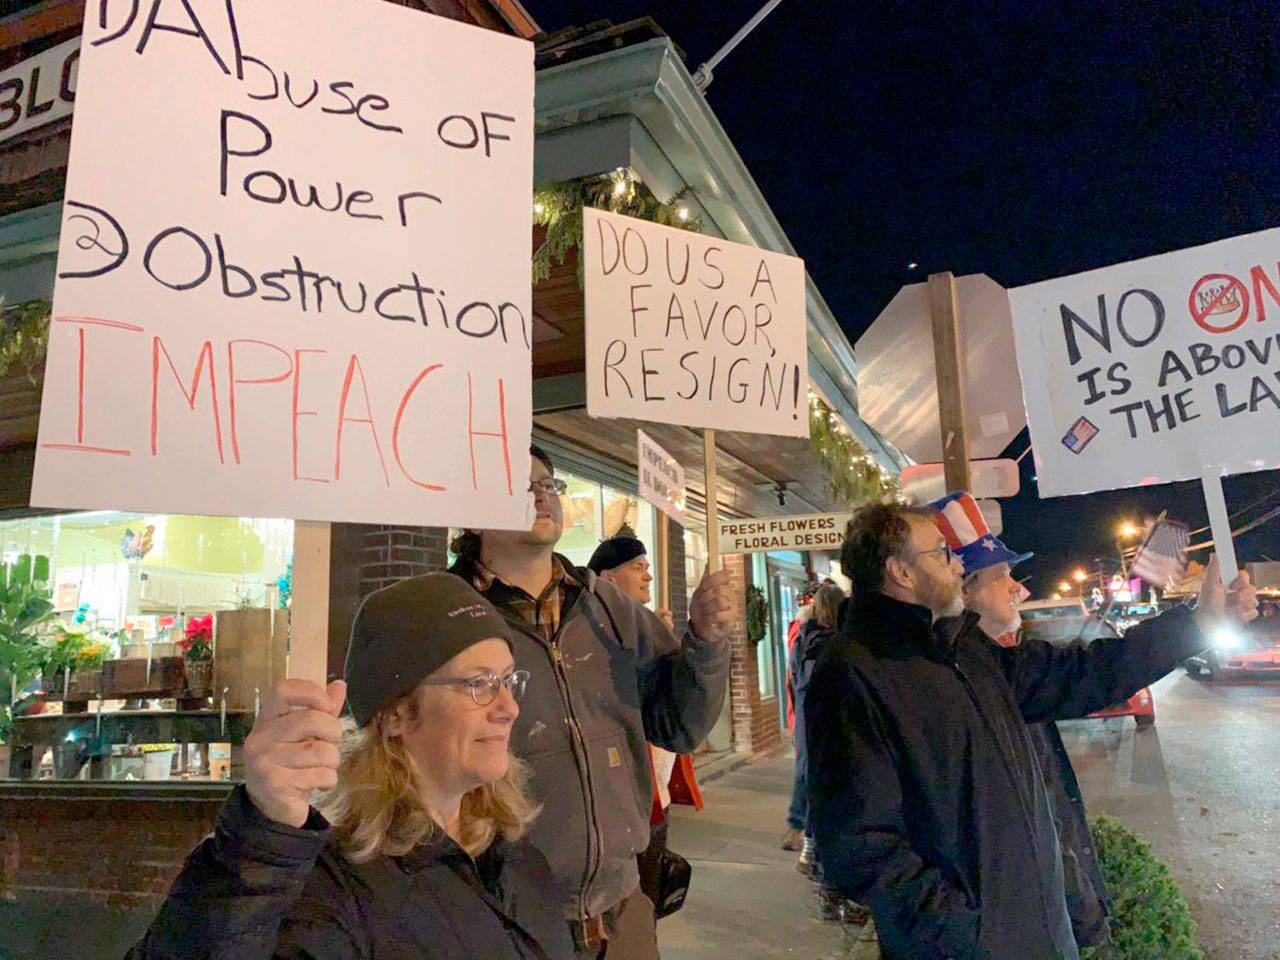 Zoe Rothchild, in the foreground, holds a sign stating the articles of impeachment against President Donald Trump as others demonstrate during a “Nobody’s Above the Law” rally on Tuesday, Dec. 17 at Vashon Highway and Bank Road. The demonstration was held one day before the House of Representatives was expected to impeach the president (Kevin Opsahl/Staff Photo).